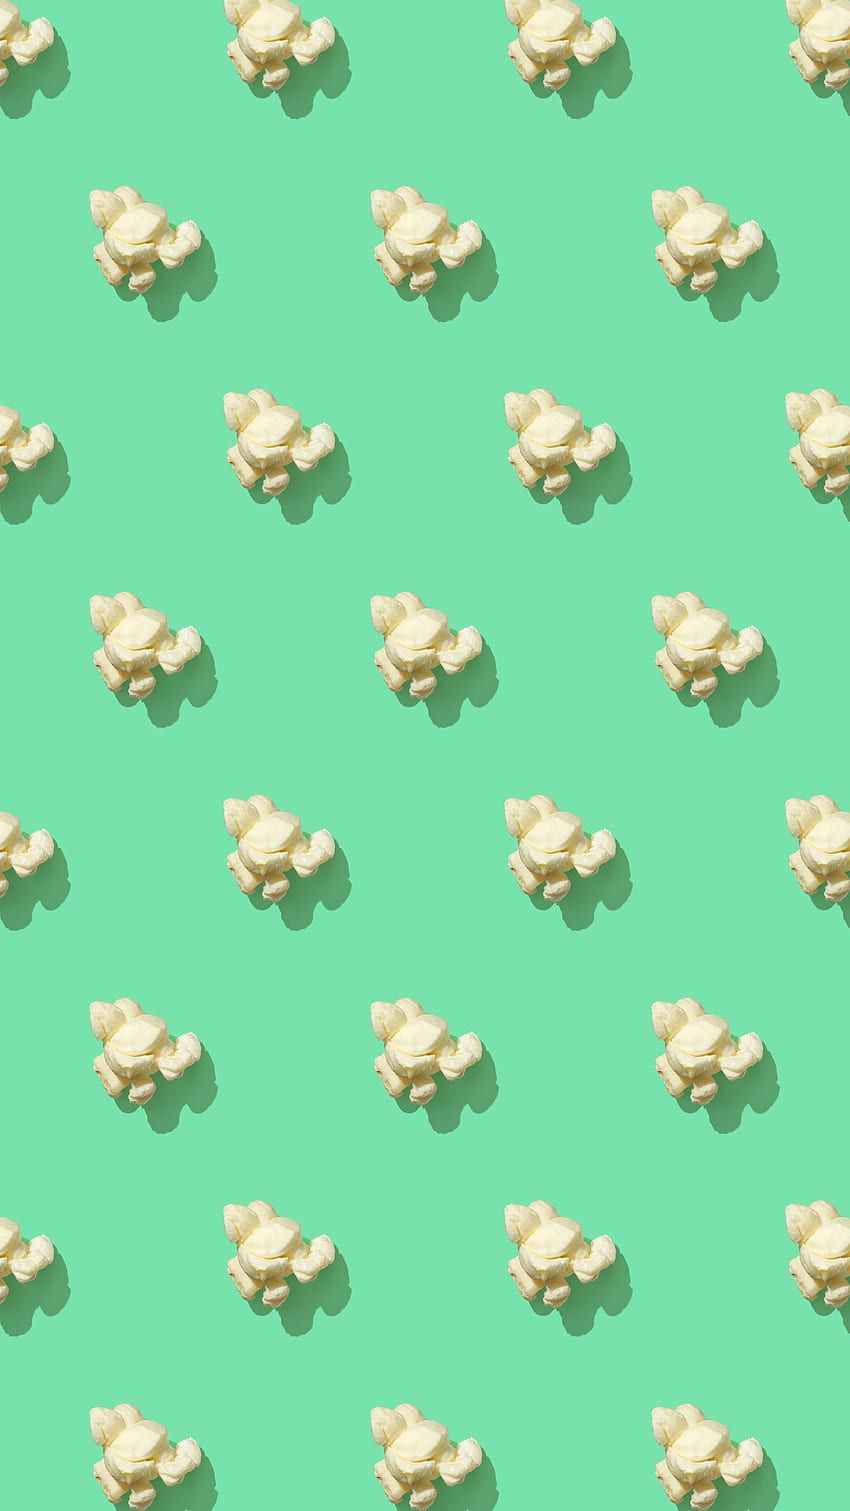 A green background with rows of popcorn - Popcorn